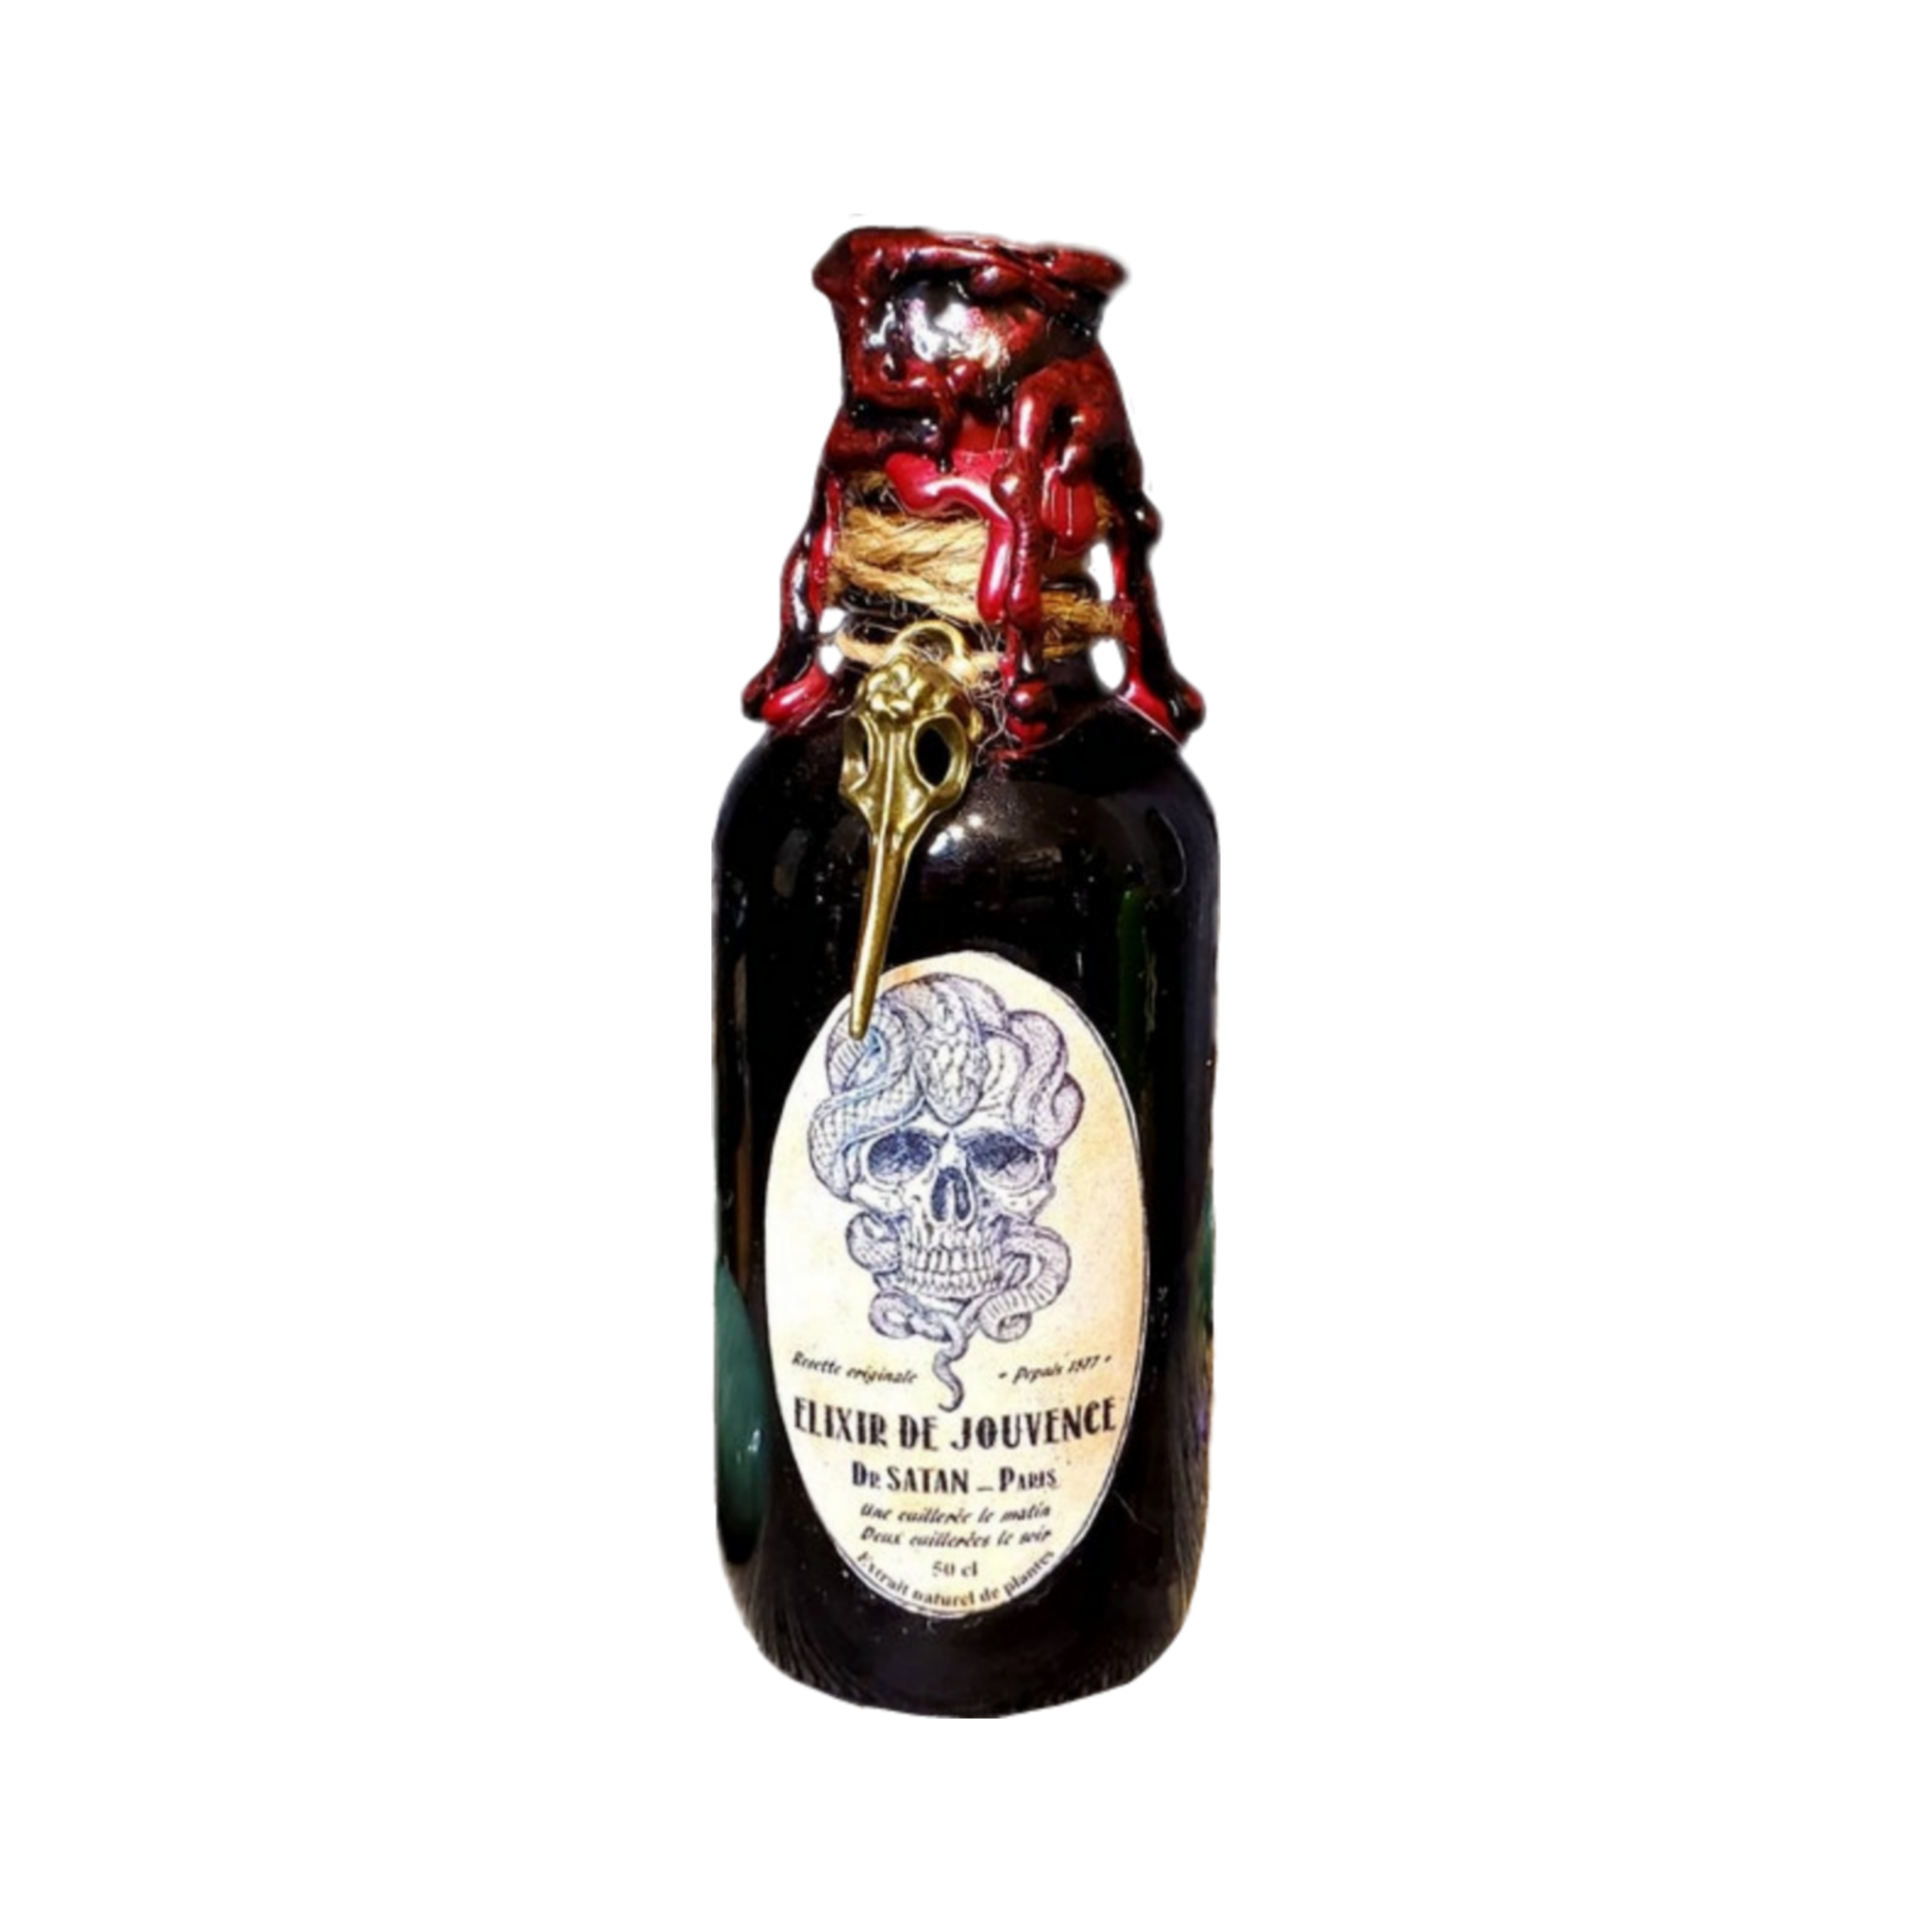 dark burgundy potion with a skull on the label and wine and wax over the cork